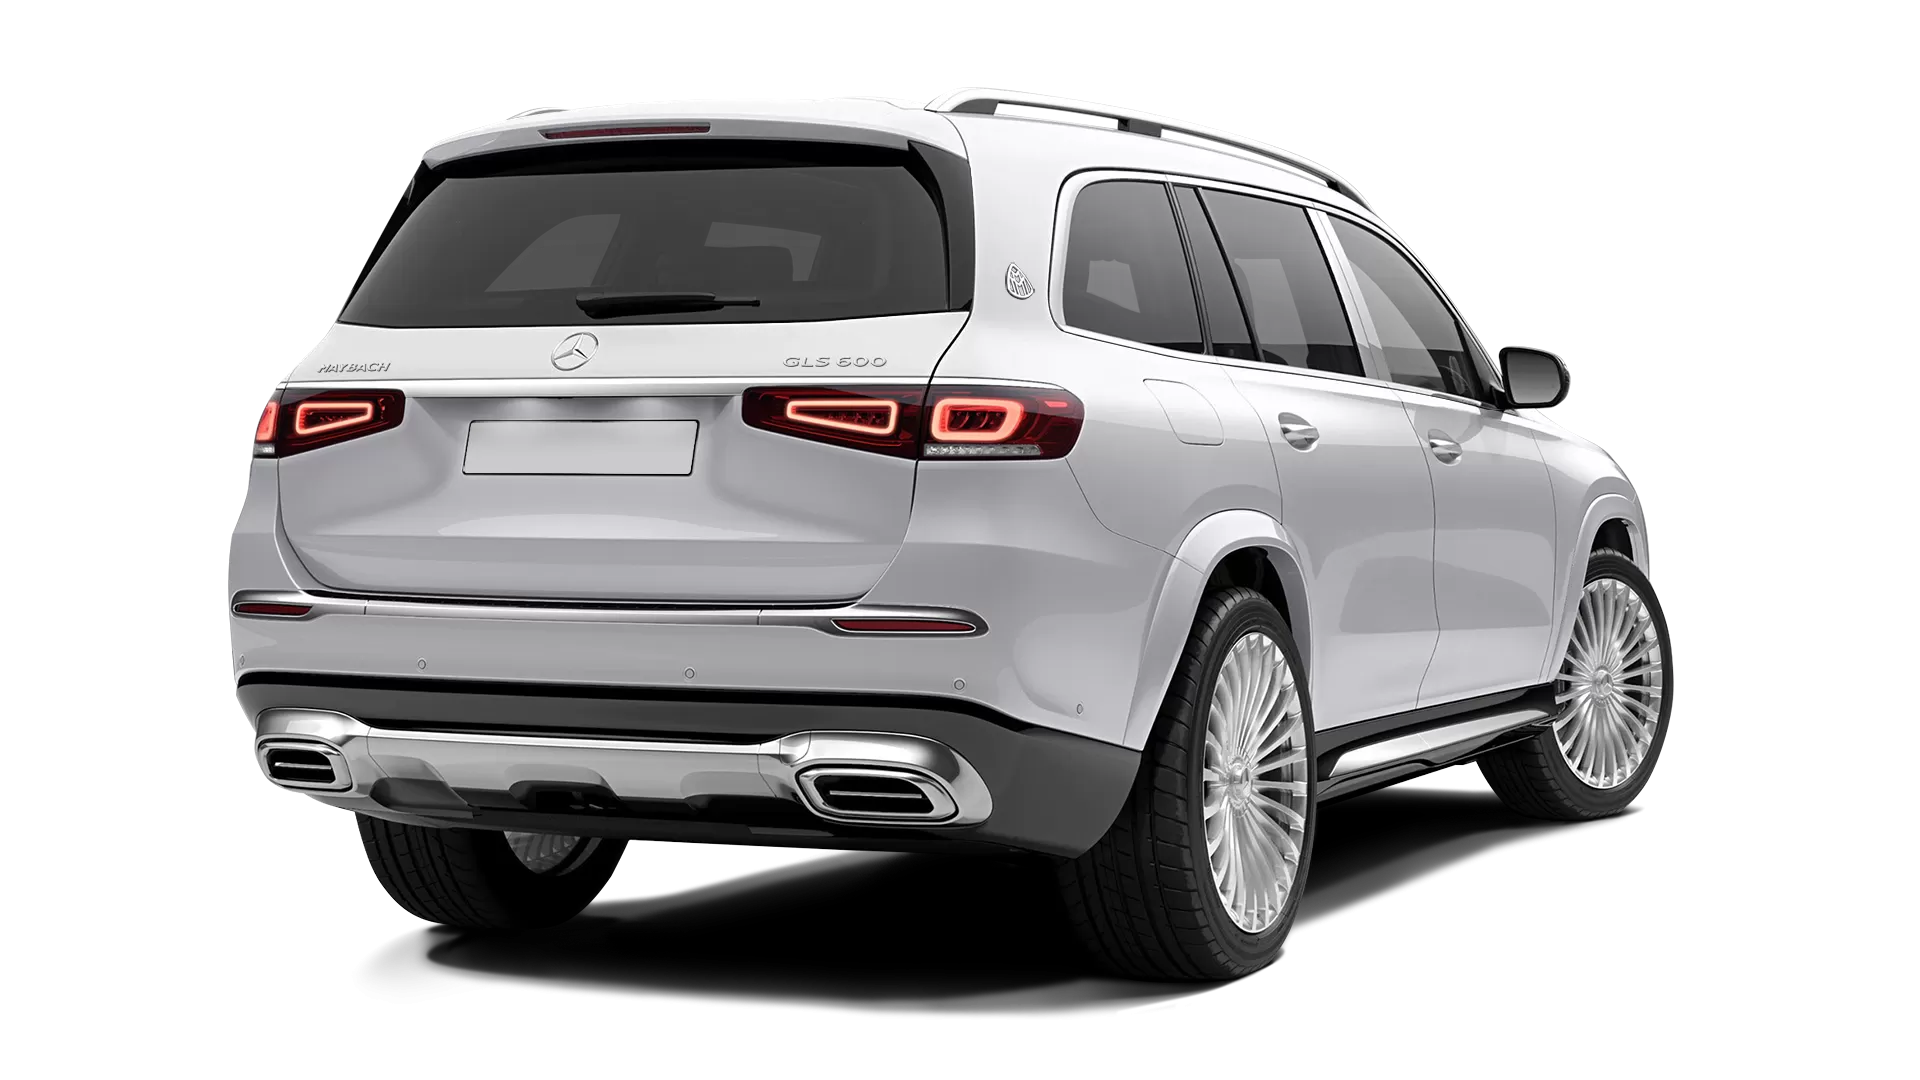 Mercedes Maybach GLS 600 stock rear view in Polar White color